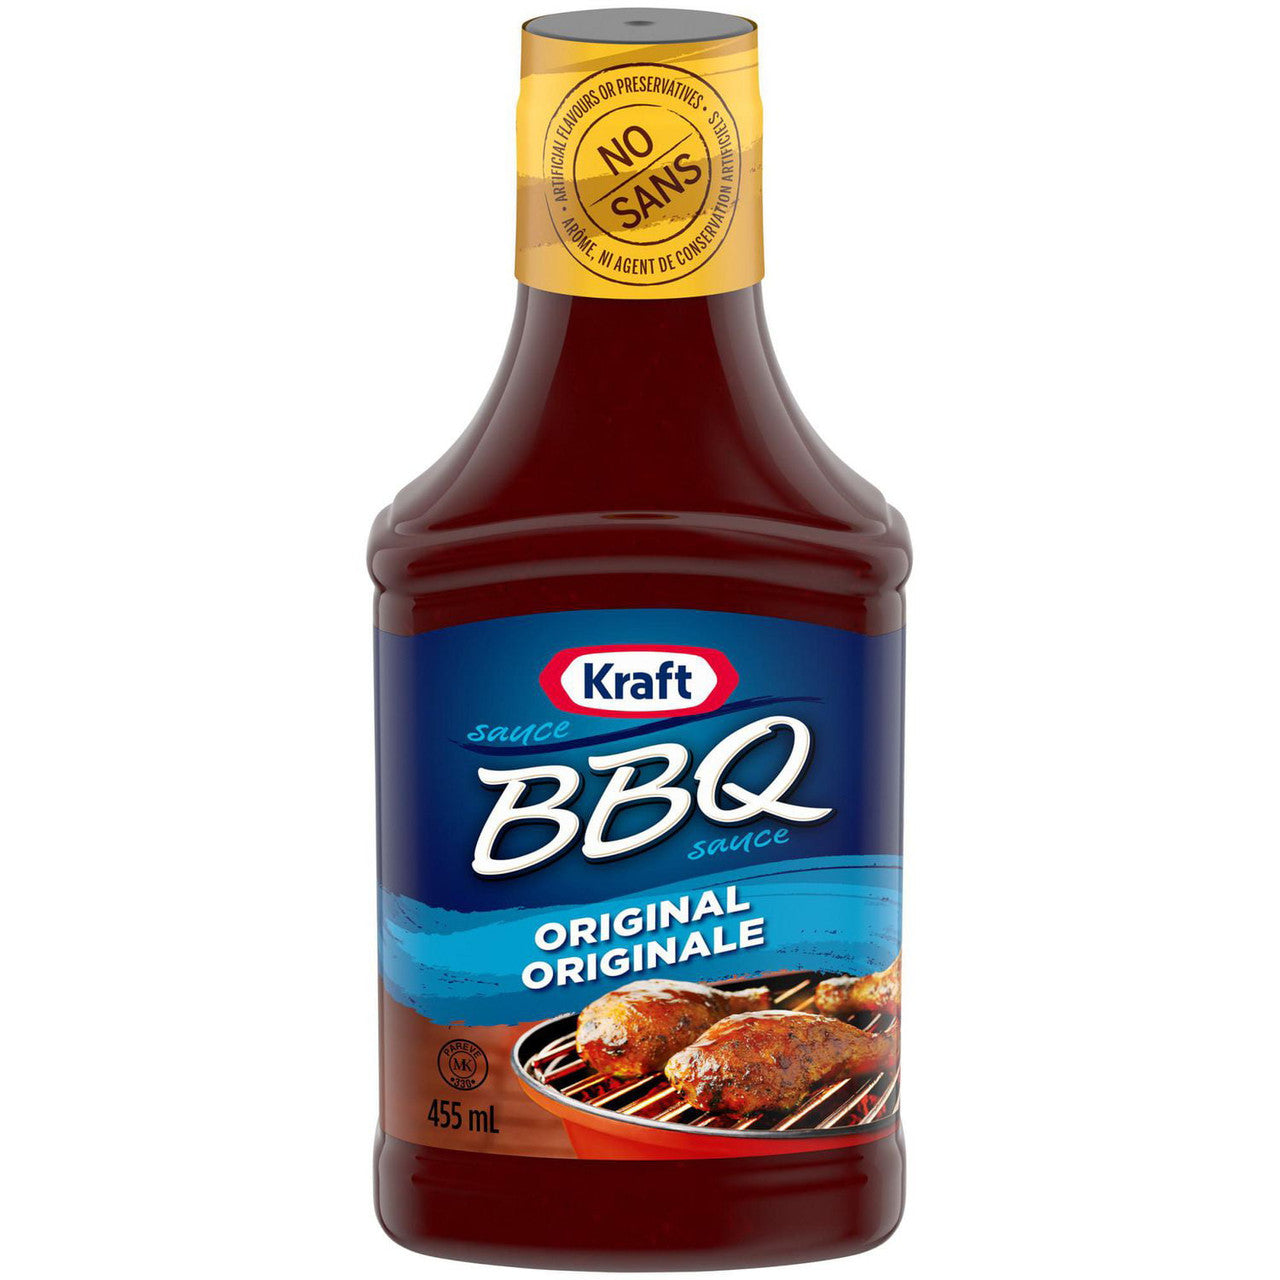 Kraft Barbecue Sauce Original (Pack of 3) 455g/ 16 oz., {Imported from Canada}